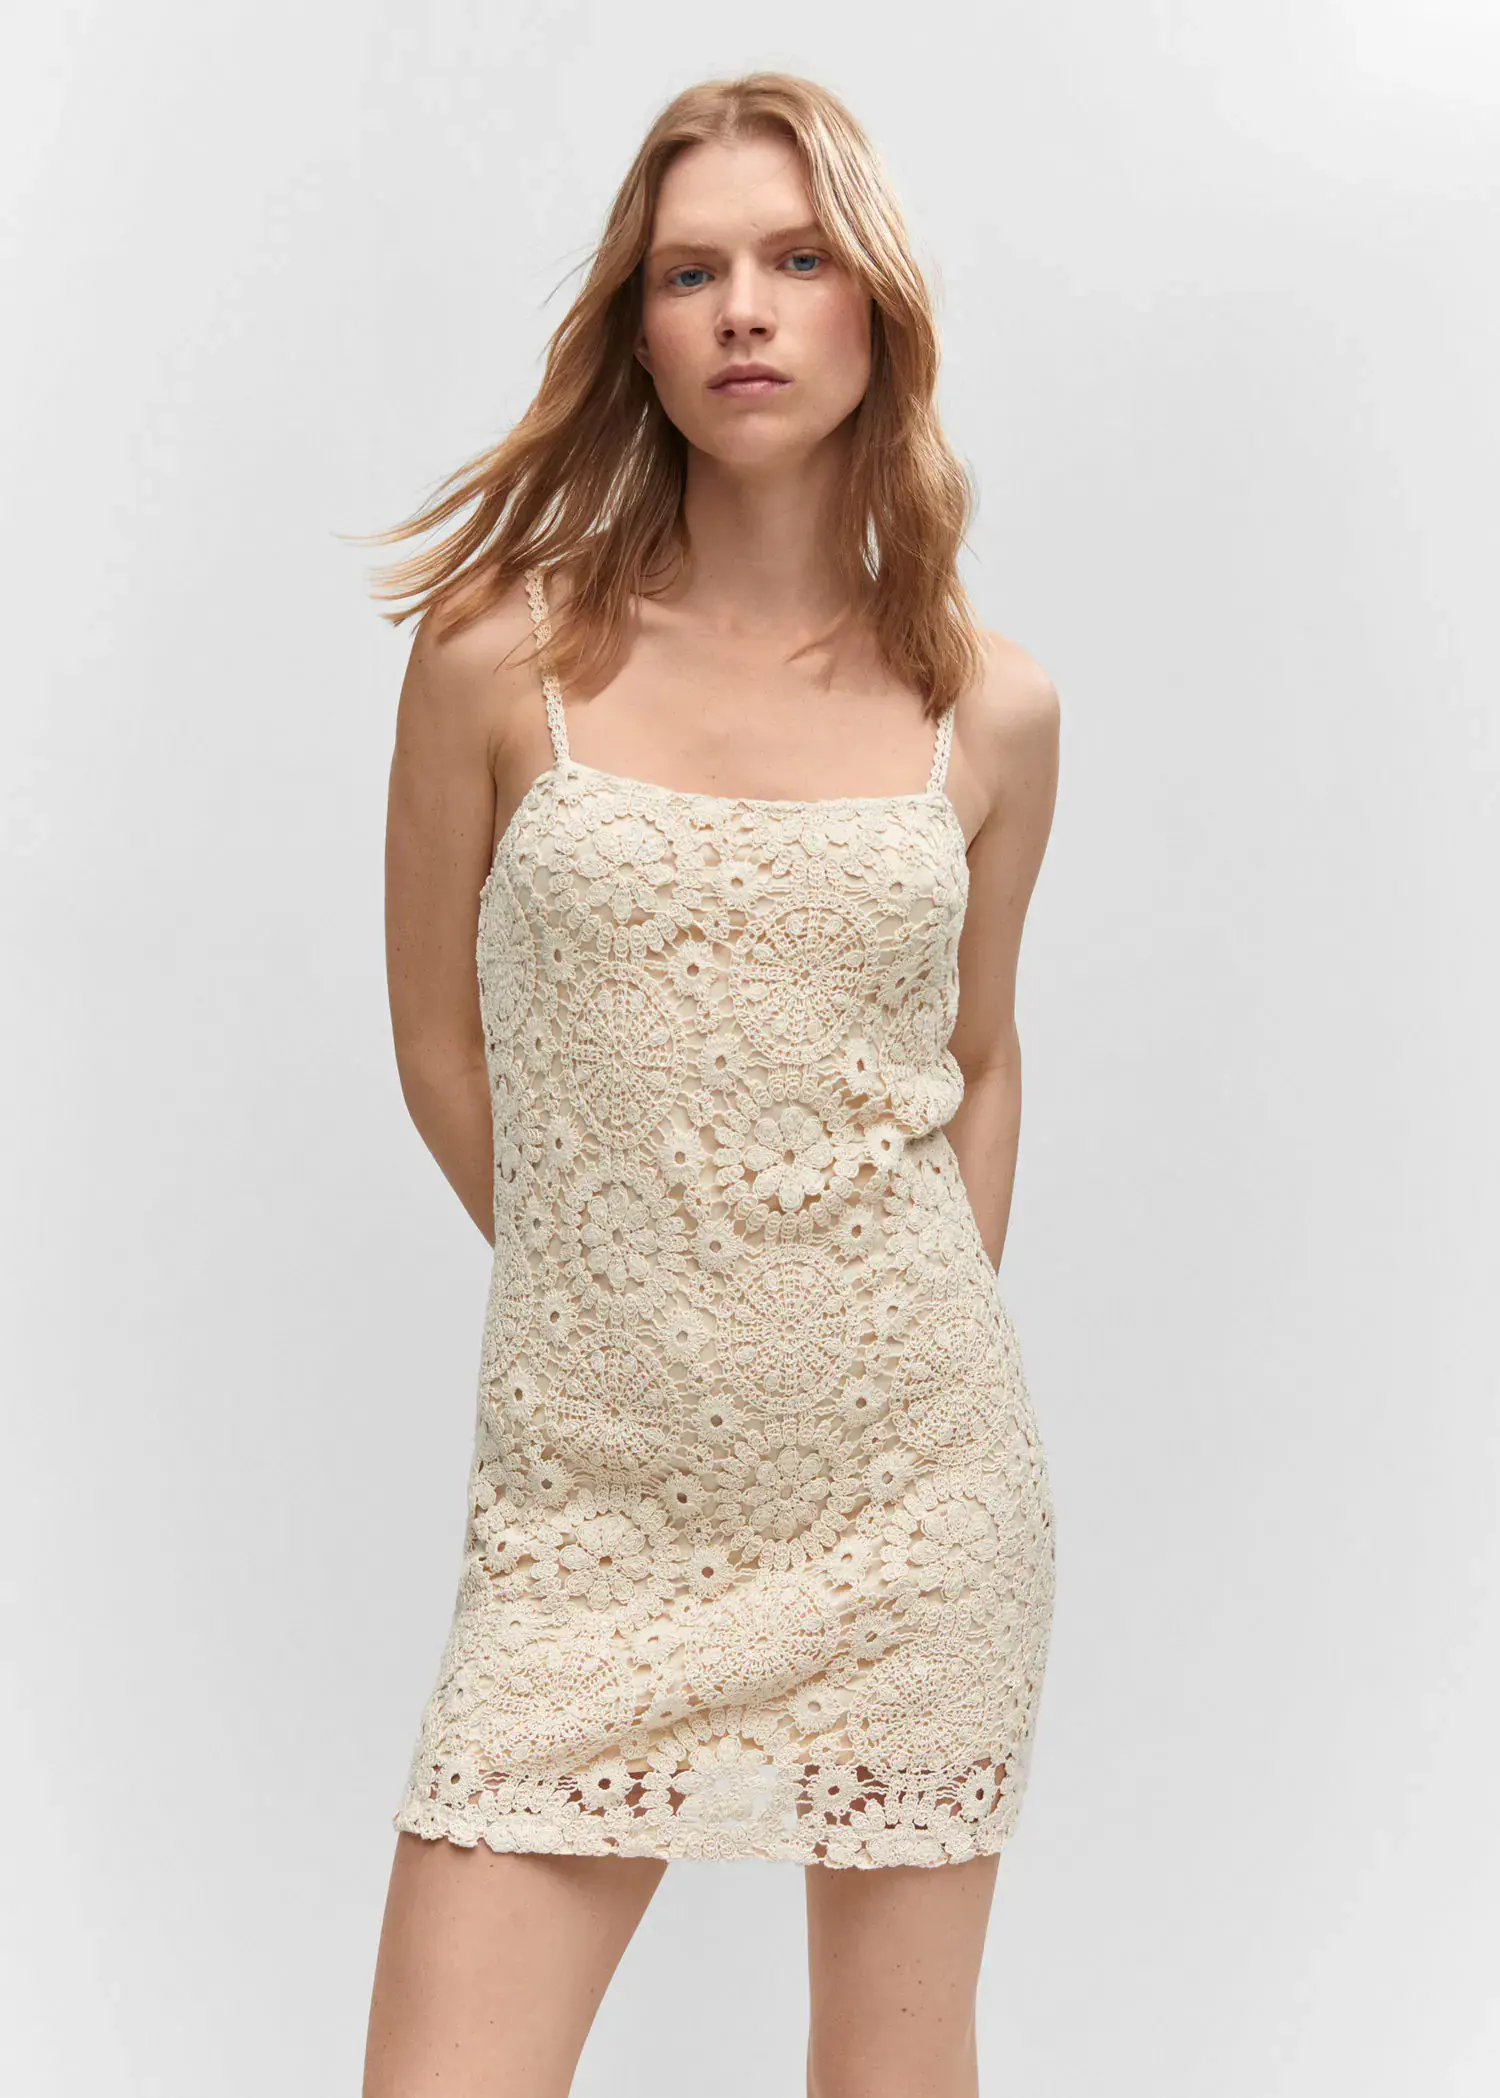 Mango Crochet short dress. a woman wearing a white dress standing in front of a white wall. 